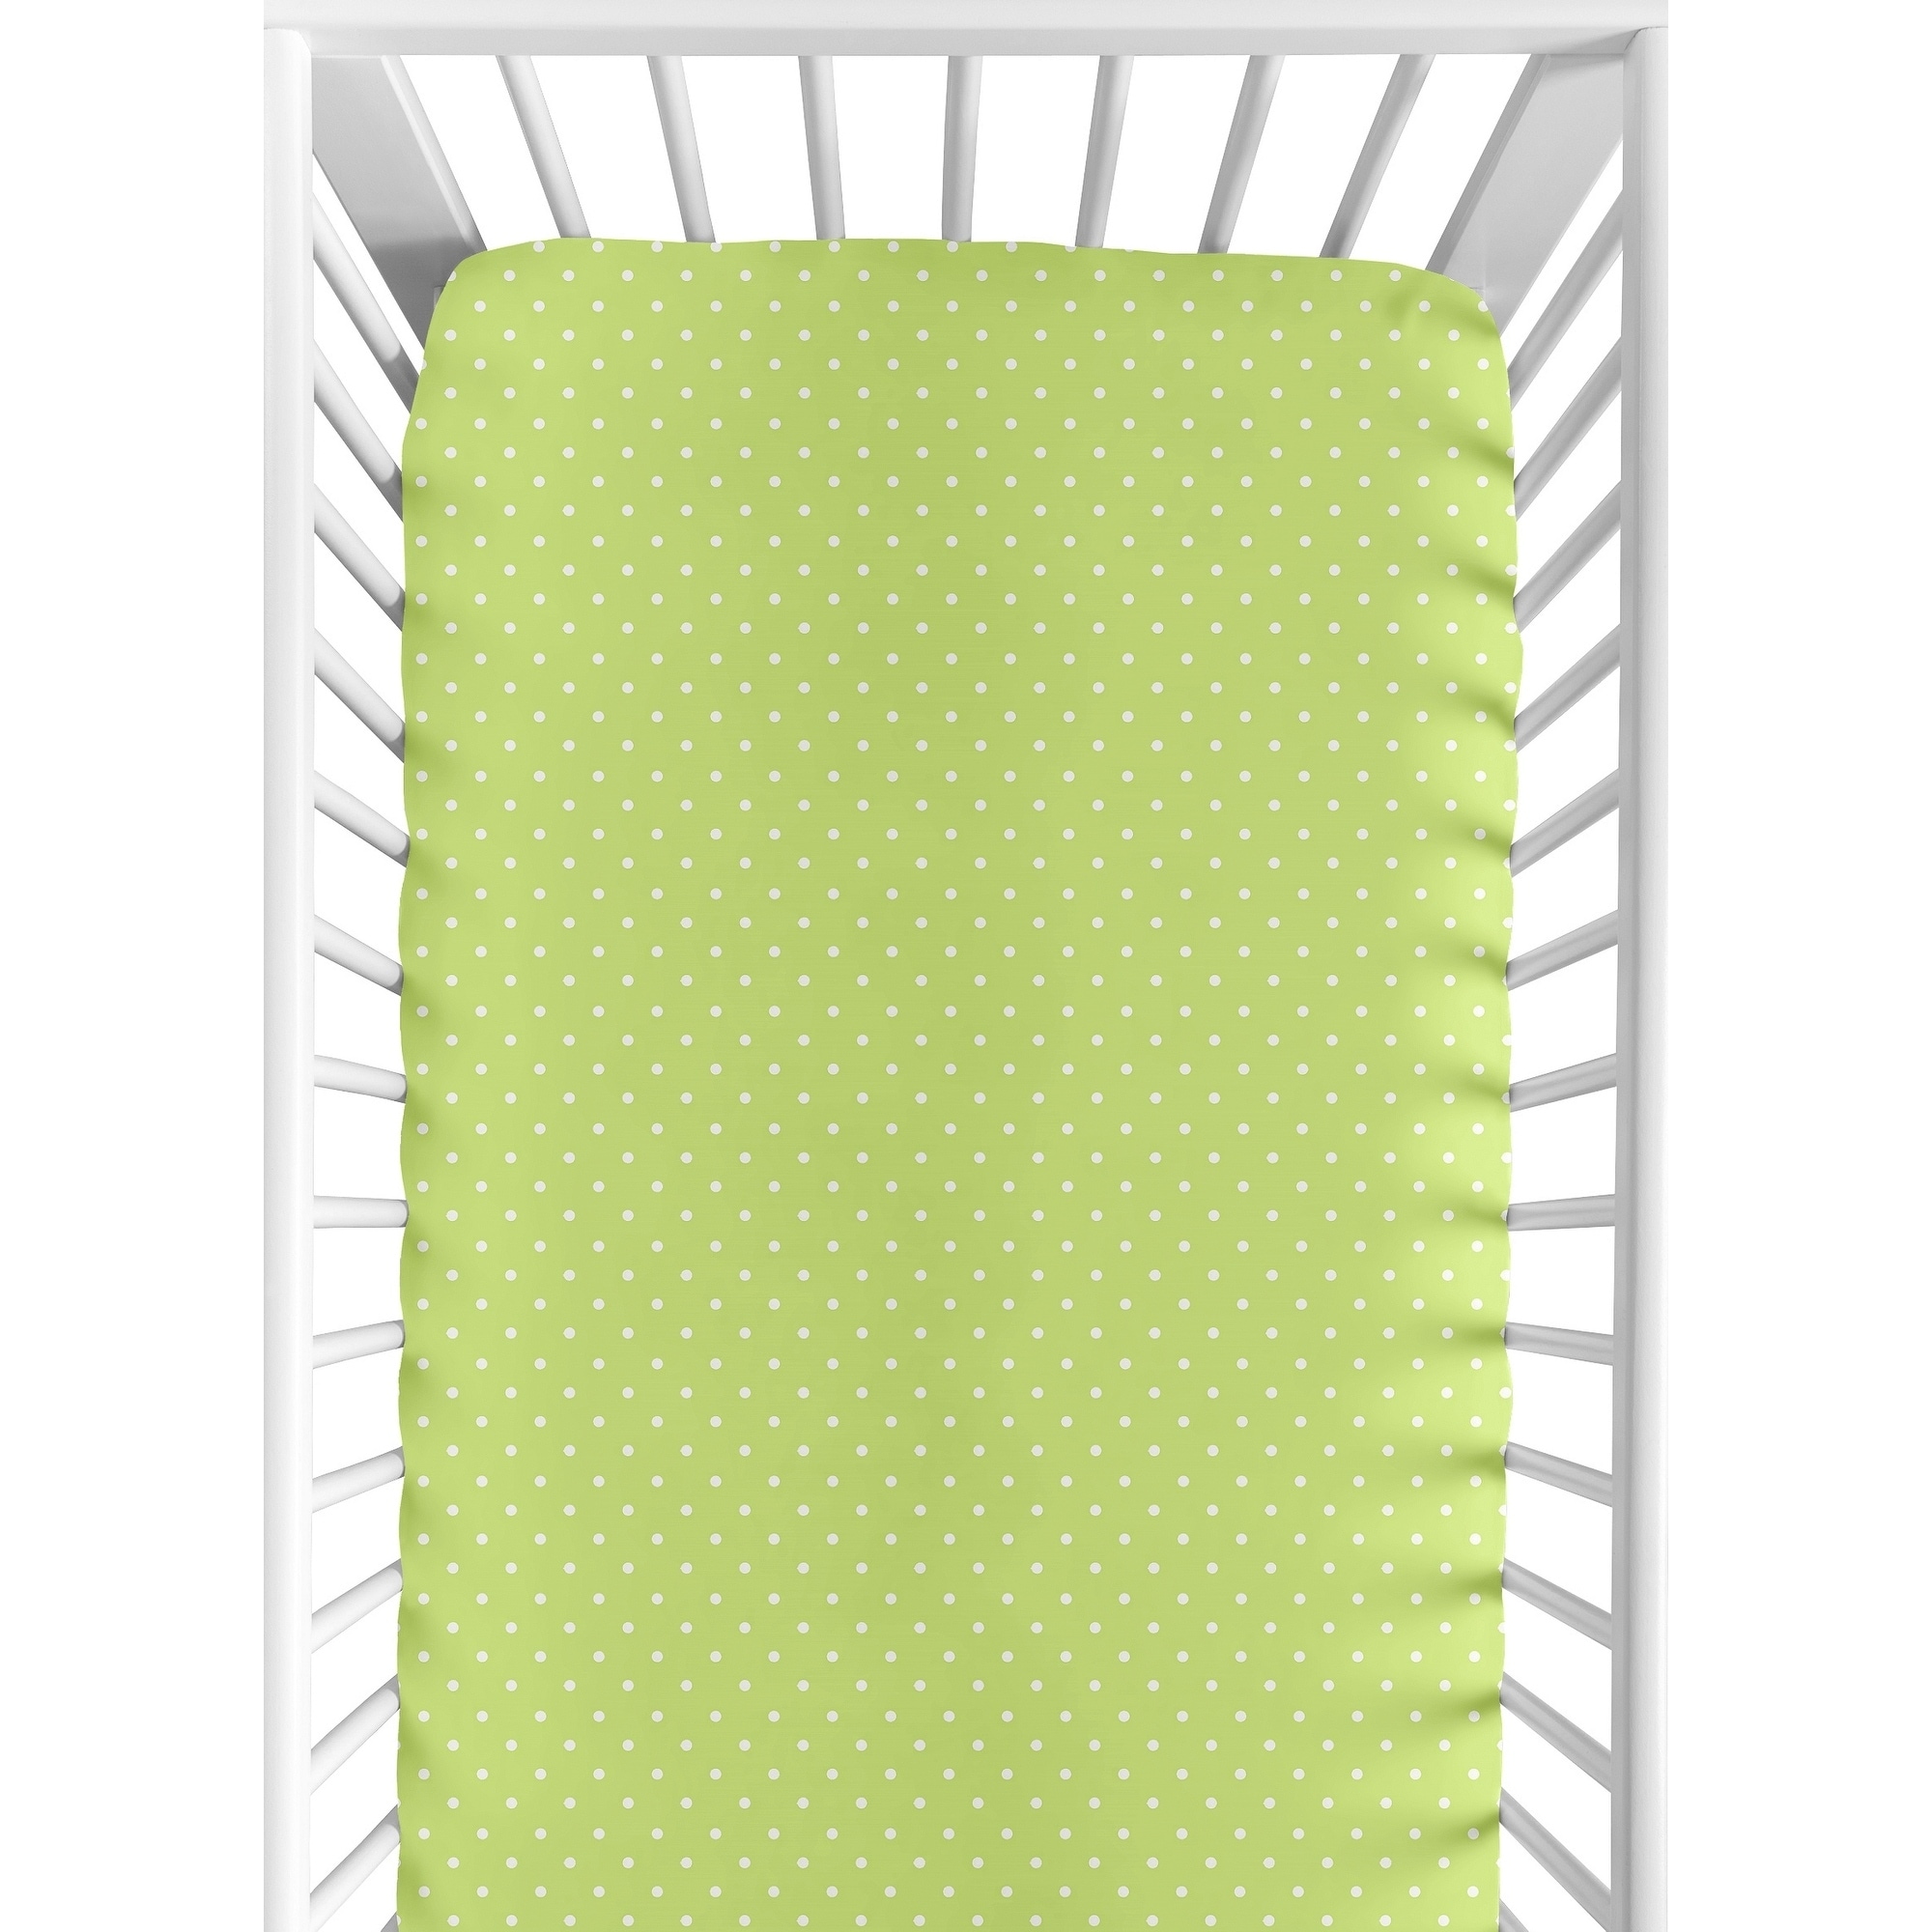 Sweet Jojo Designs Fitted Crib Sheet In Lime Mini Dot (Lime and whiteDimensions 52 inches x 28 inches x 8 inchesMaterial 100 percent cottonCoordinates with all pieces of the matching Sweet Jojo Designs setsCare instructions Machine washableFits all sta